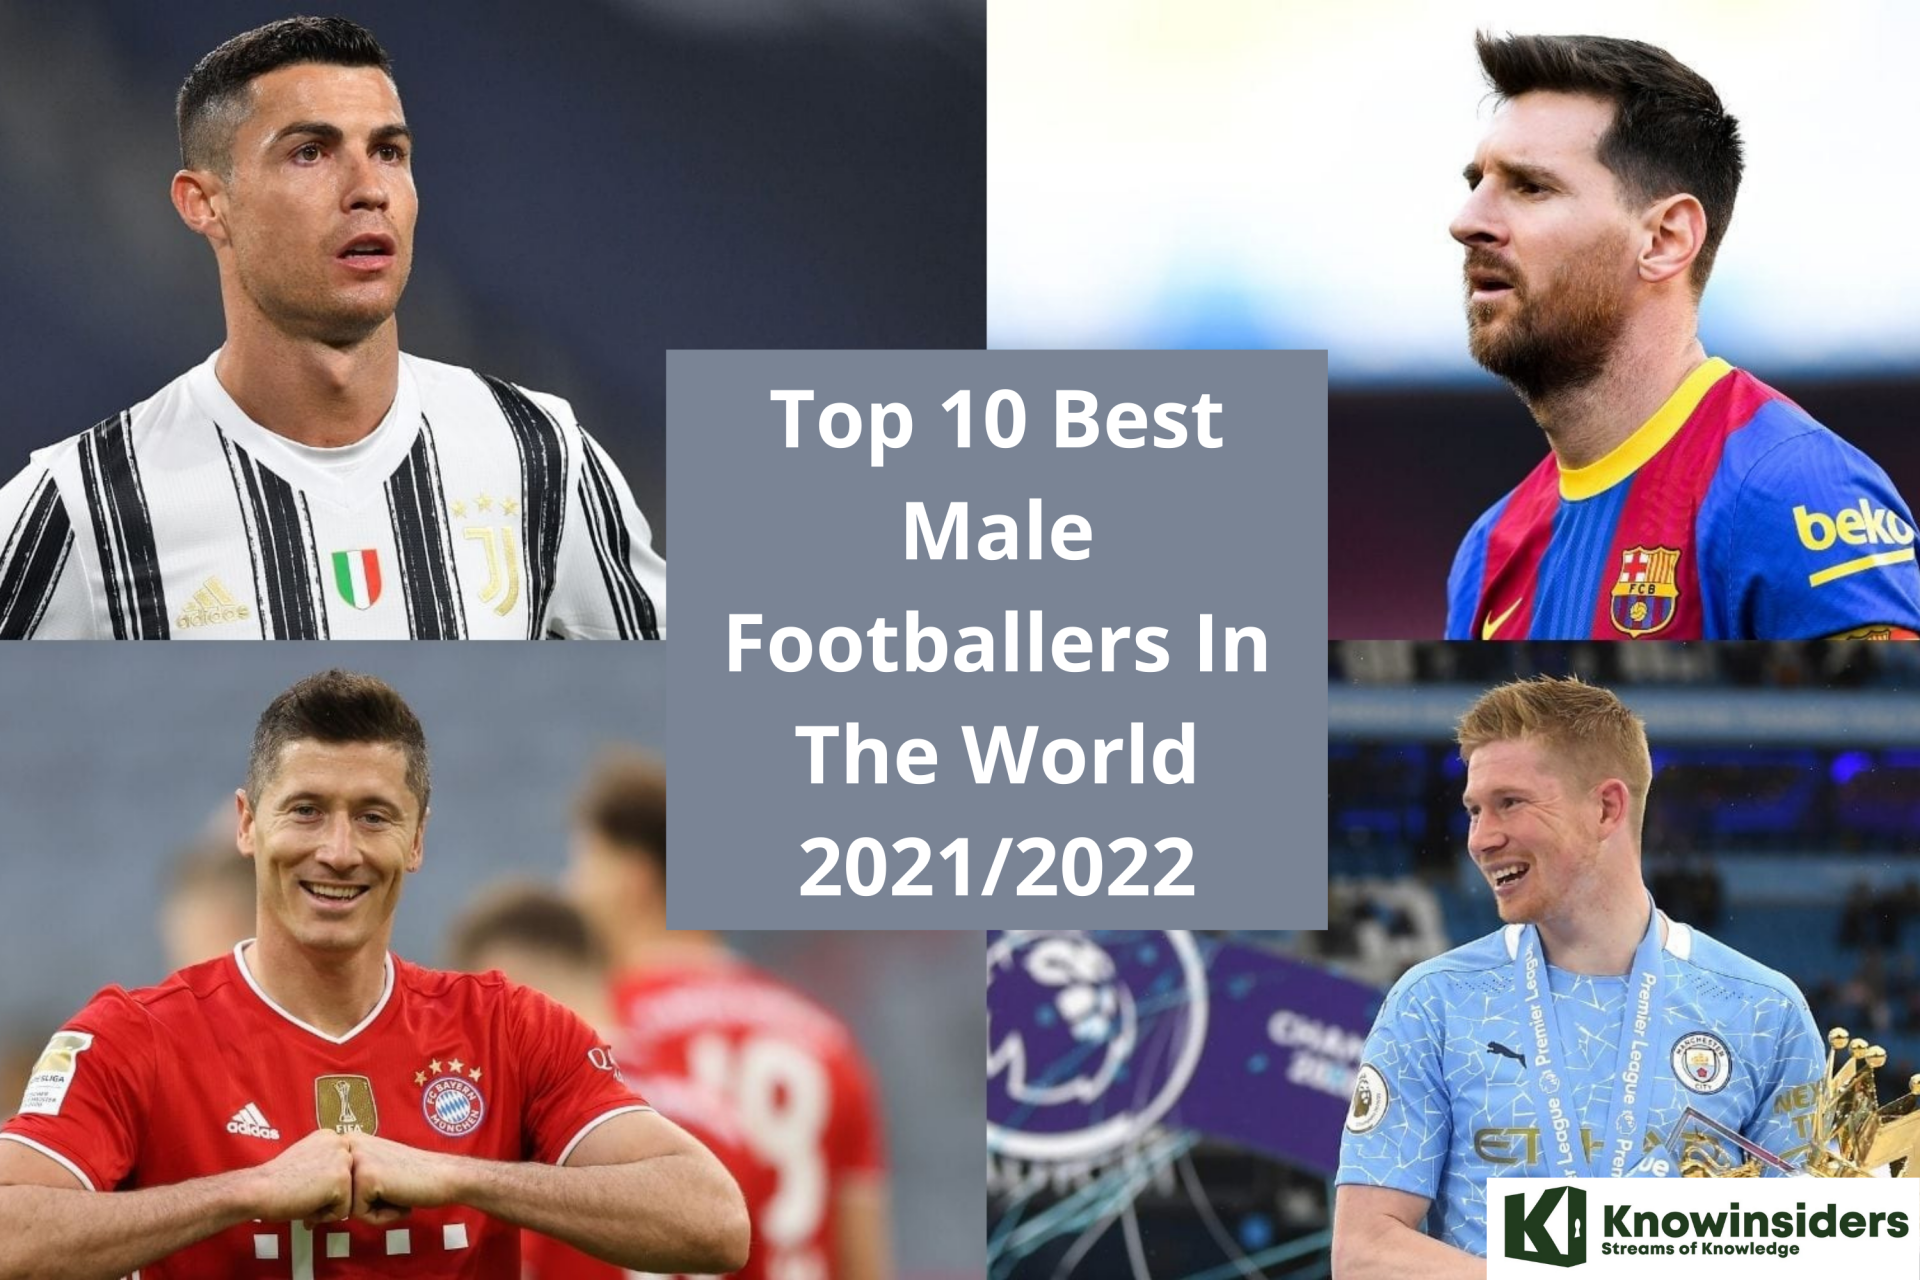 Top 10 Best Male Footballers In The World 2021/2022